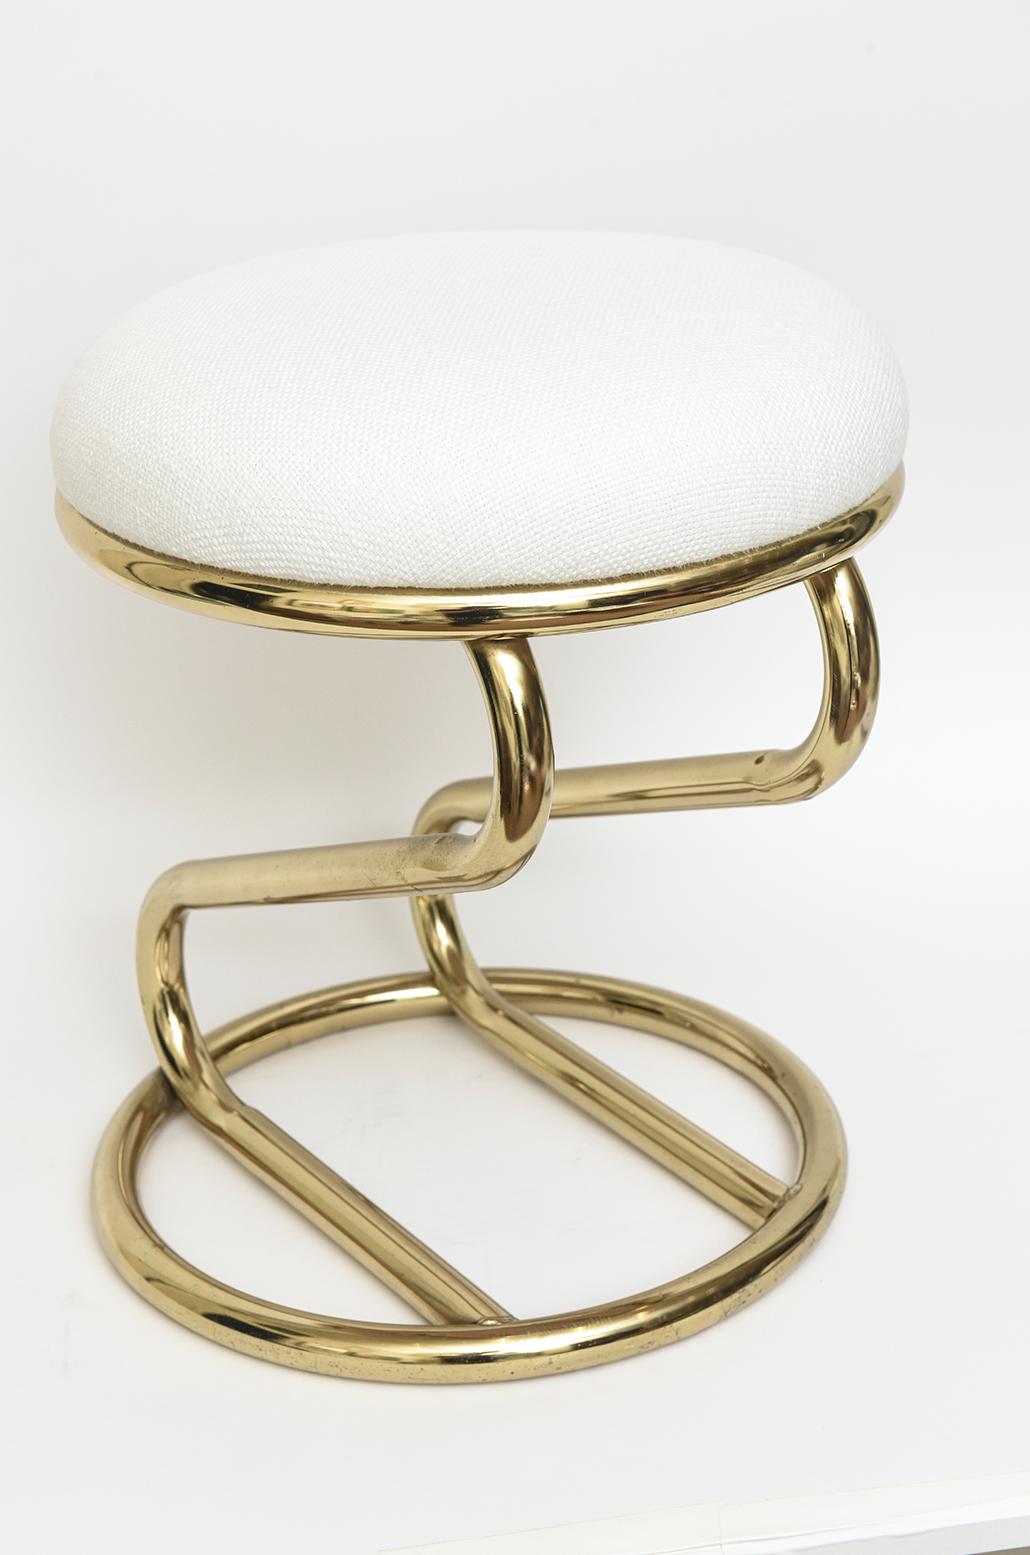 Vintage Brass over Steel and White Upholstered Zig Zag Stool In Good Condition For Sale In North Miami, FL